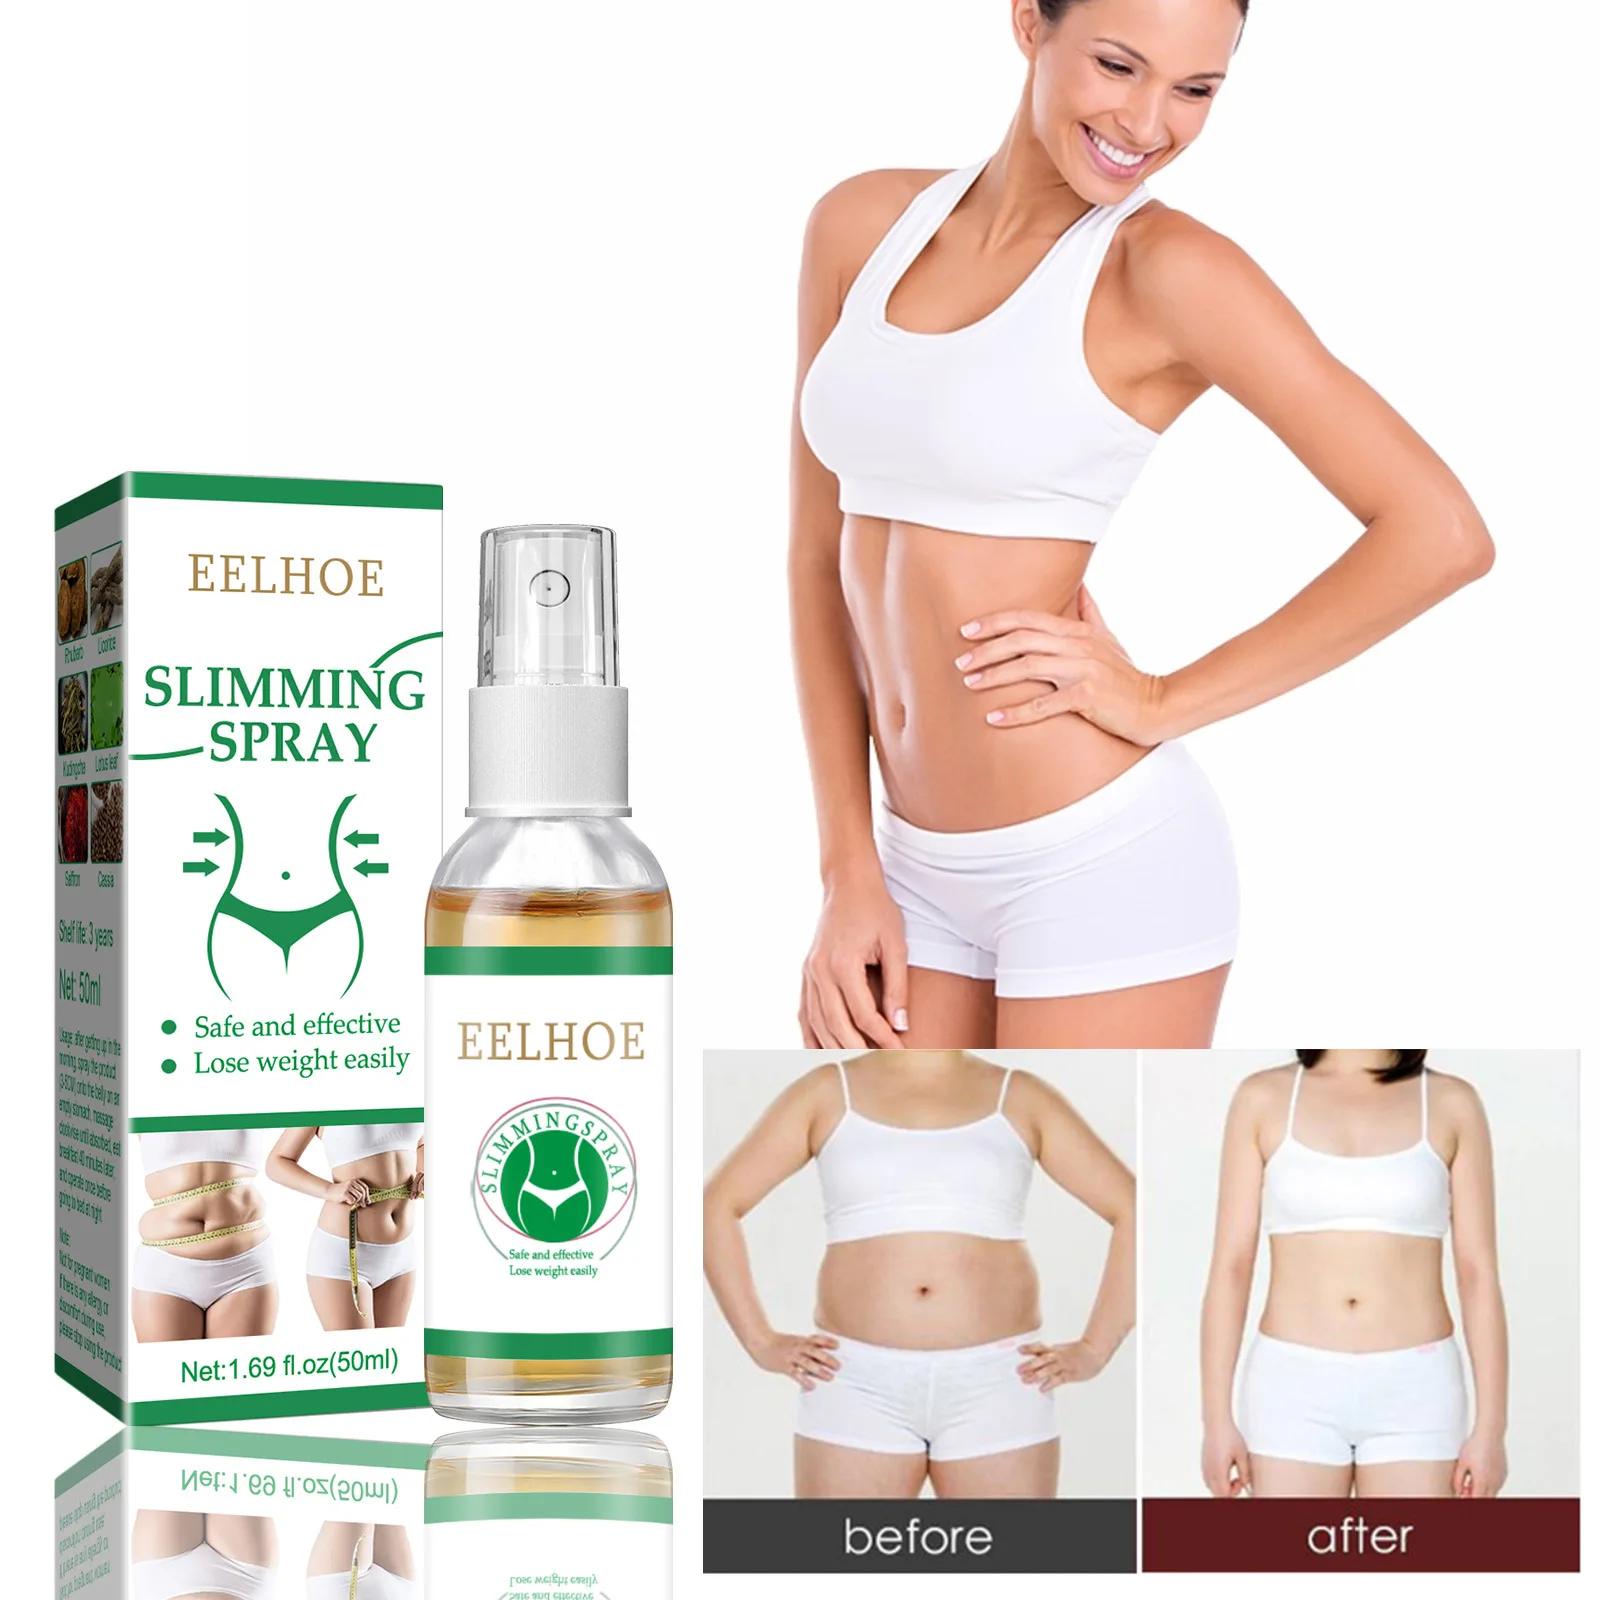 Slimming and slimming spray massage tightens the abdomen tightens the belly and thighs leaving the skin beautiful and slimming